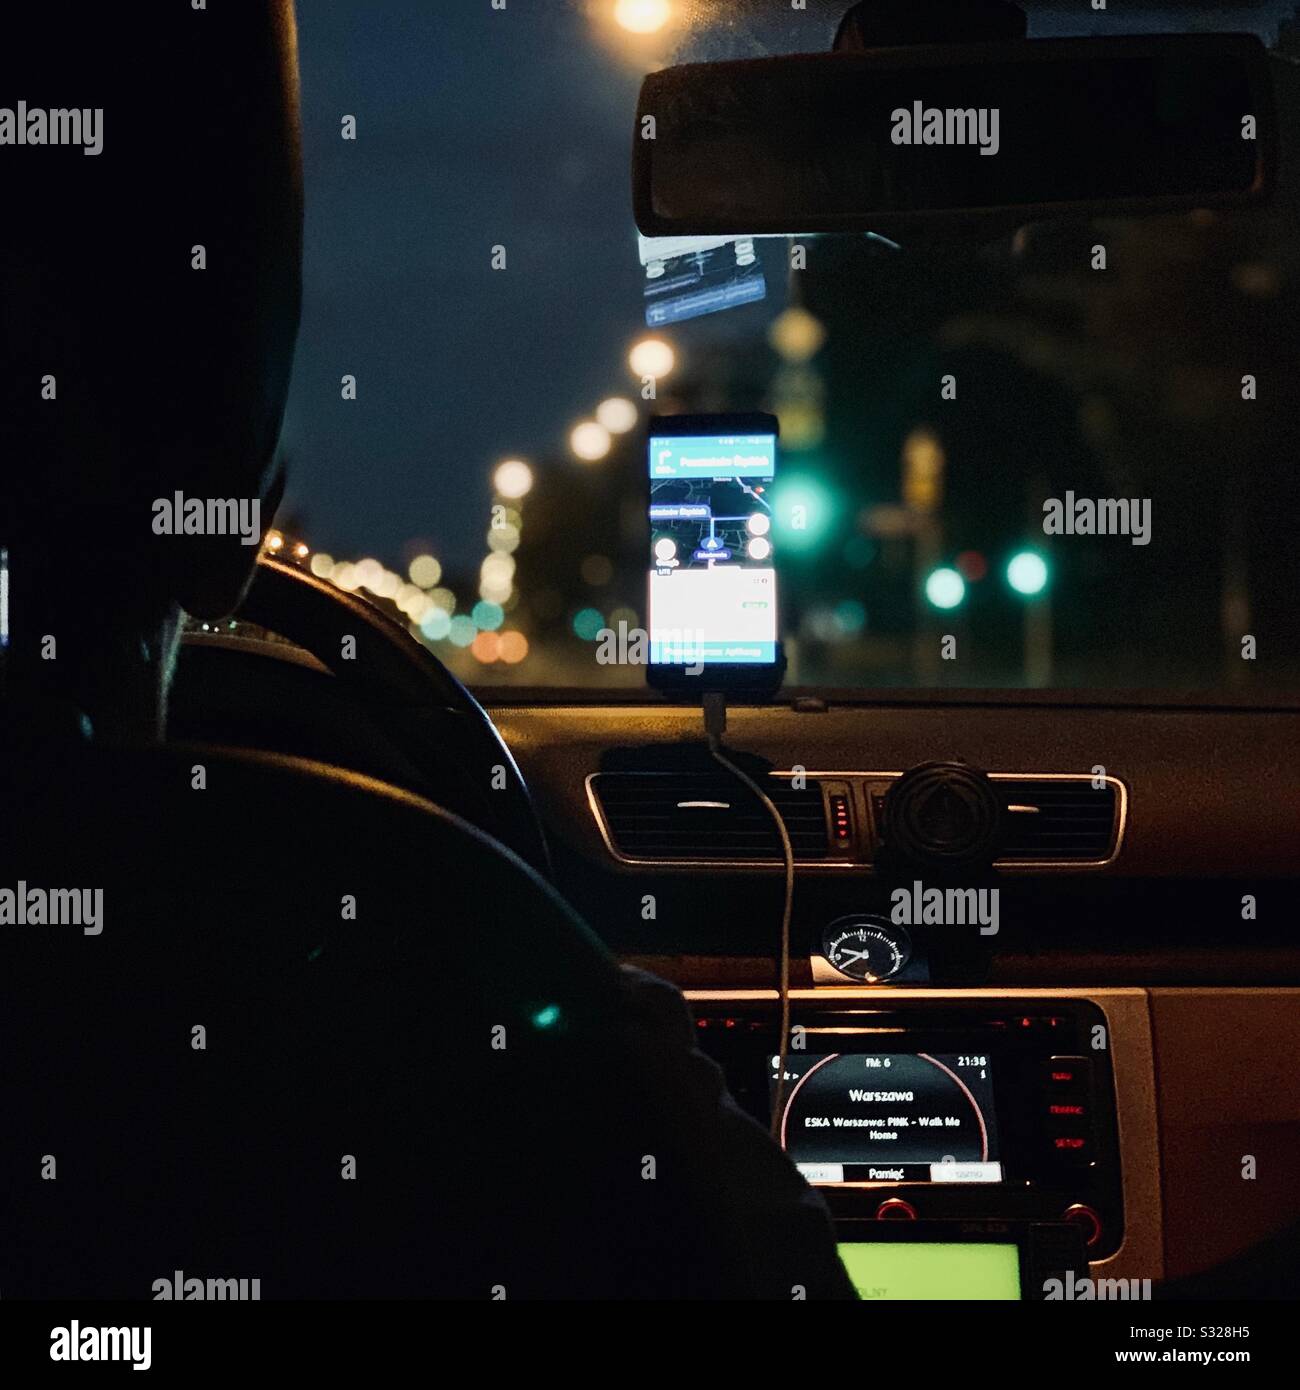 View from a car driven at night Stock Photo